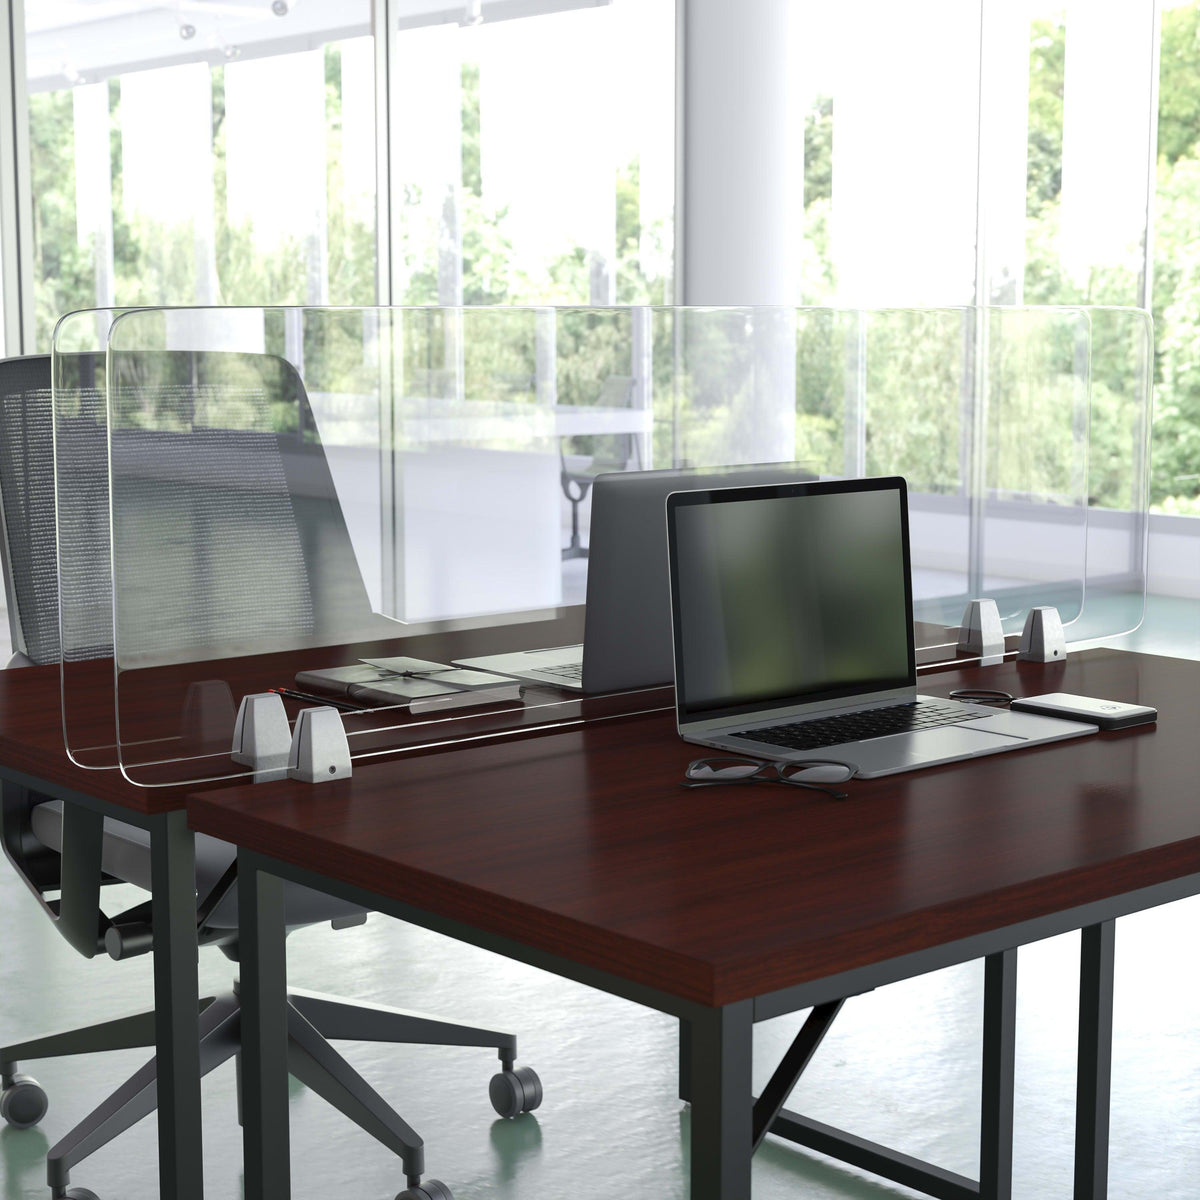 55"L x 18"H |#| Clear Acrylic Desk Partition, 18"H x 55"L (Installation Hardware Included)